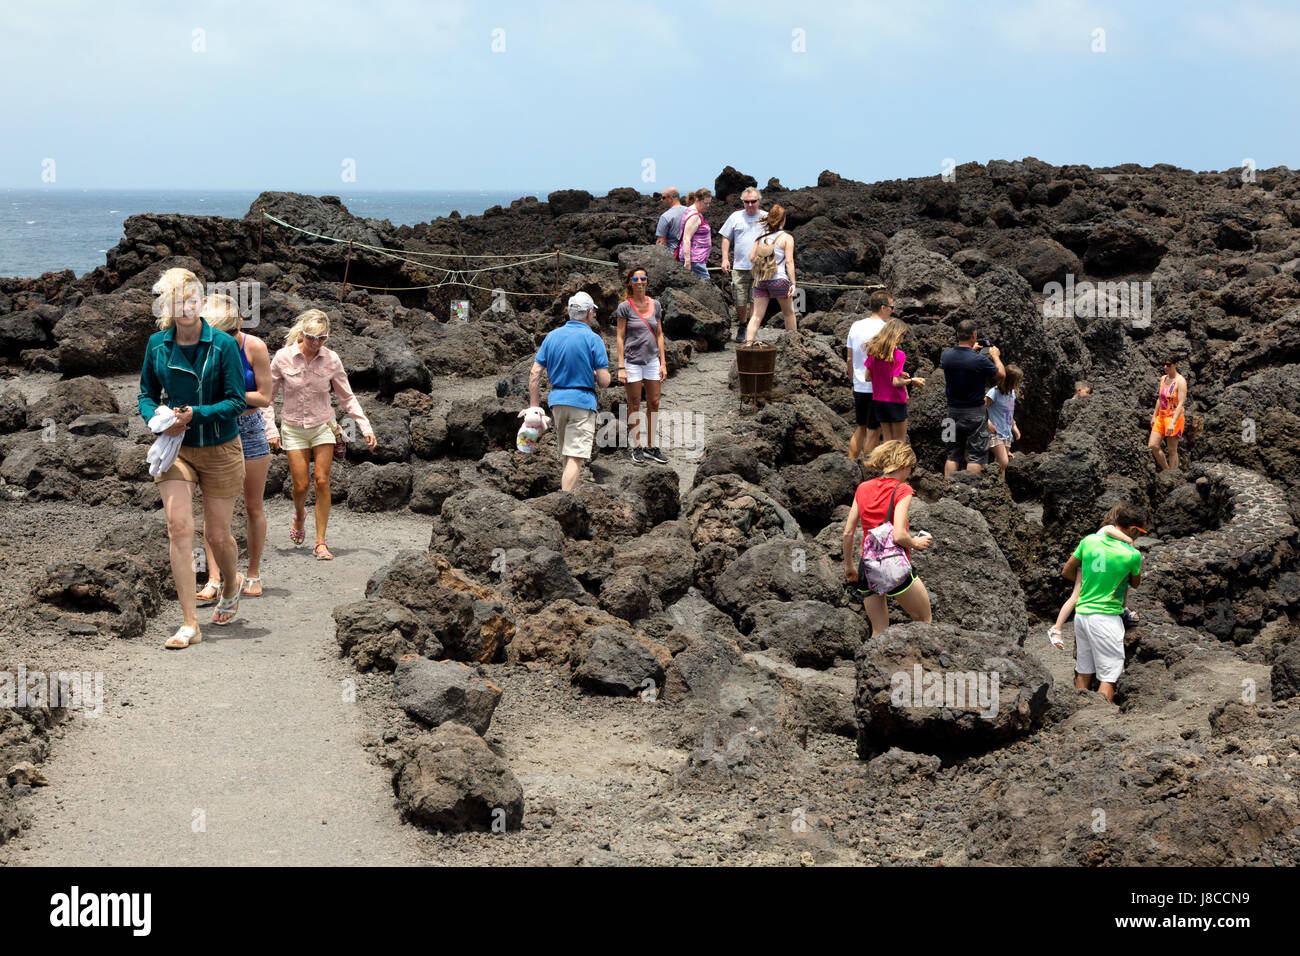 Lanzarote tourism - Tourists walking in the old lava flows at Los Hervideros on the west coast, Lanzarote, Canary Islands, Europe Stock Photo